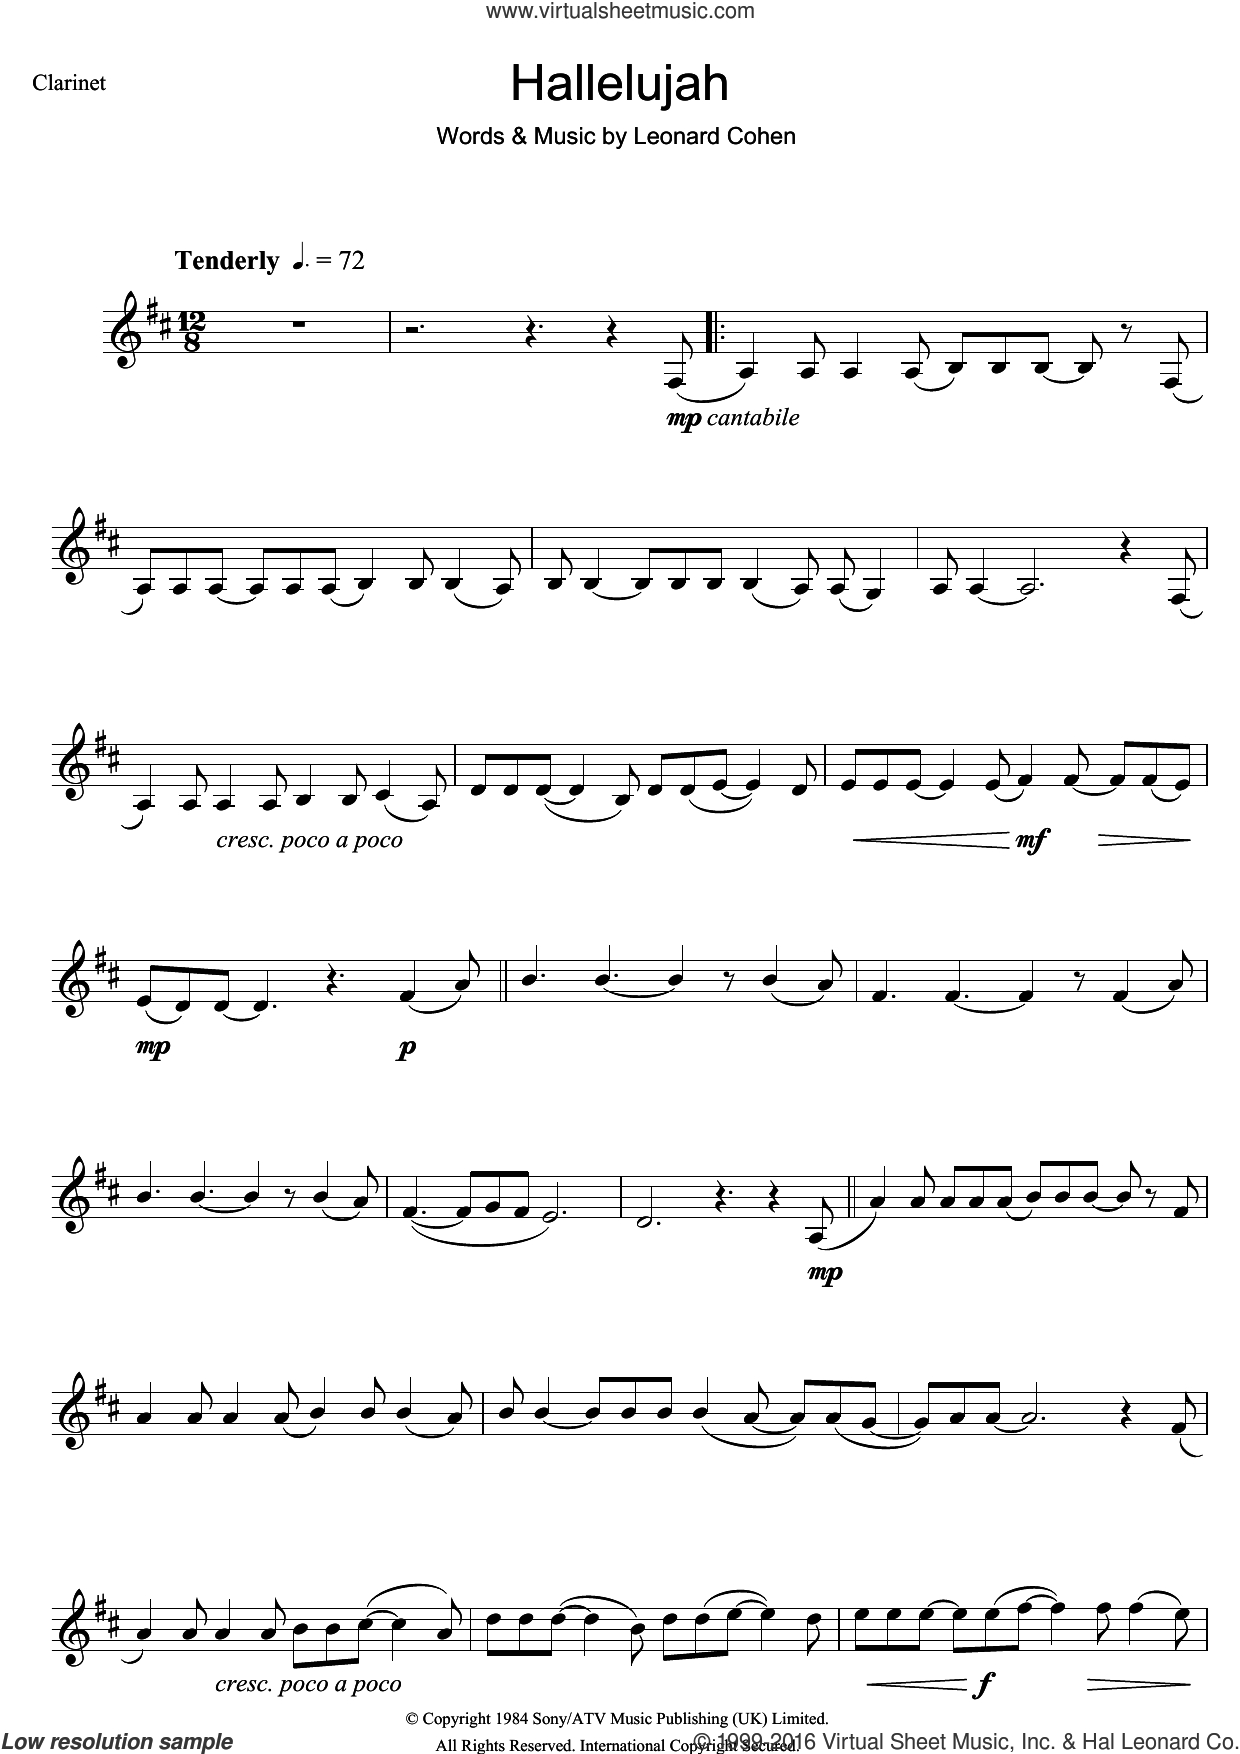 free-printable-piano-sheet-music-for-hallelujah-by-leonard-cohen-free-printable